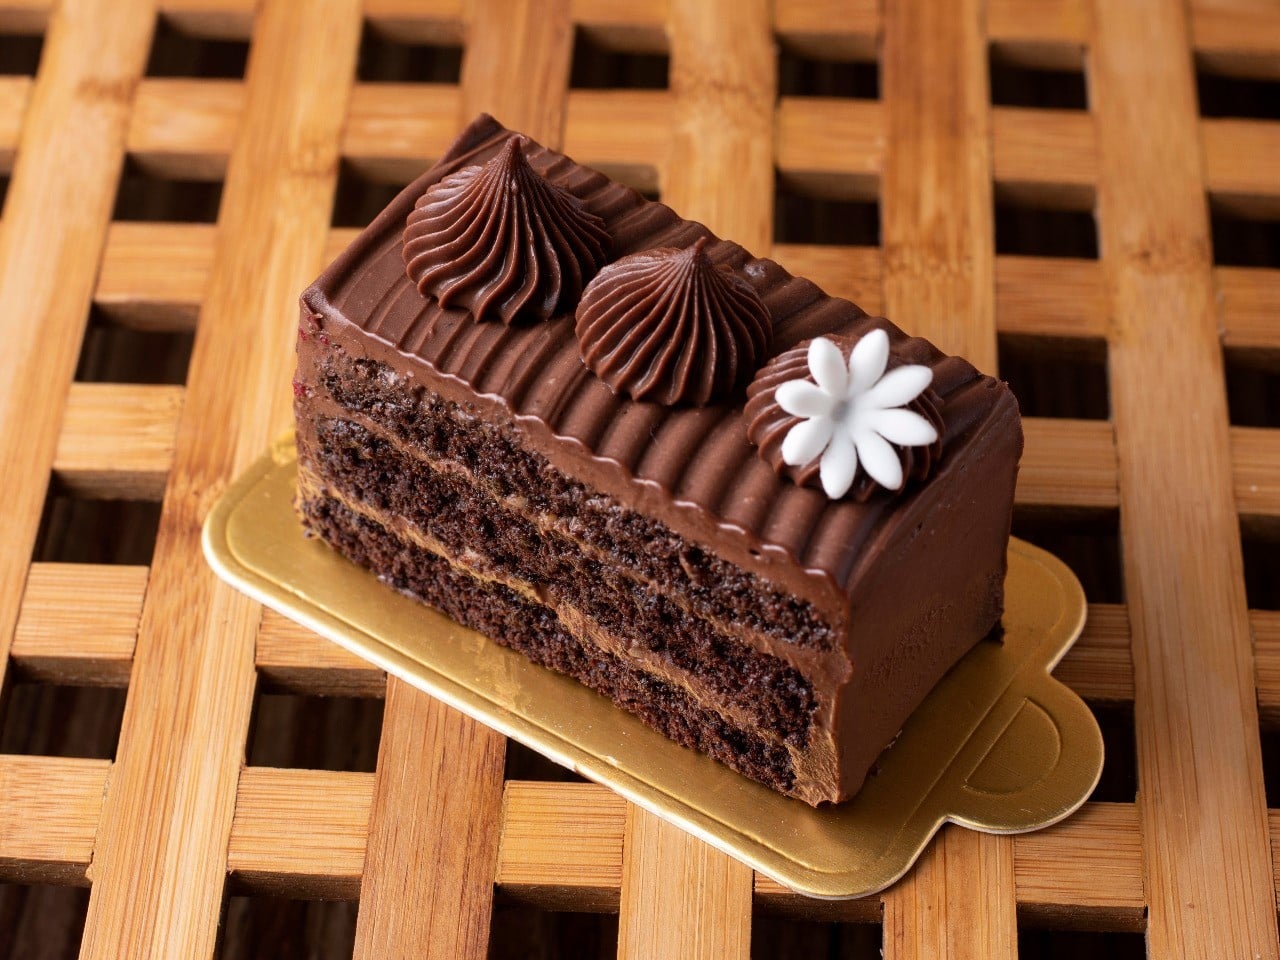 Order Dutch Truffle Pastry at Best Price Online in India | Theobroma